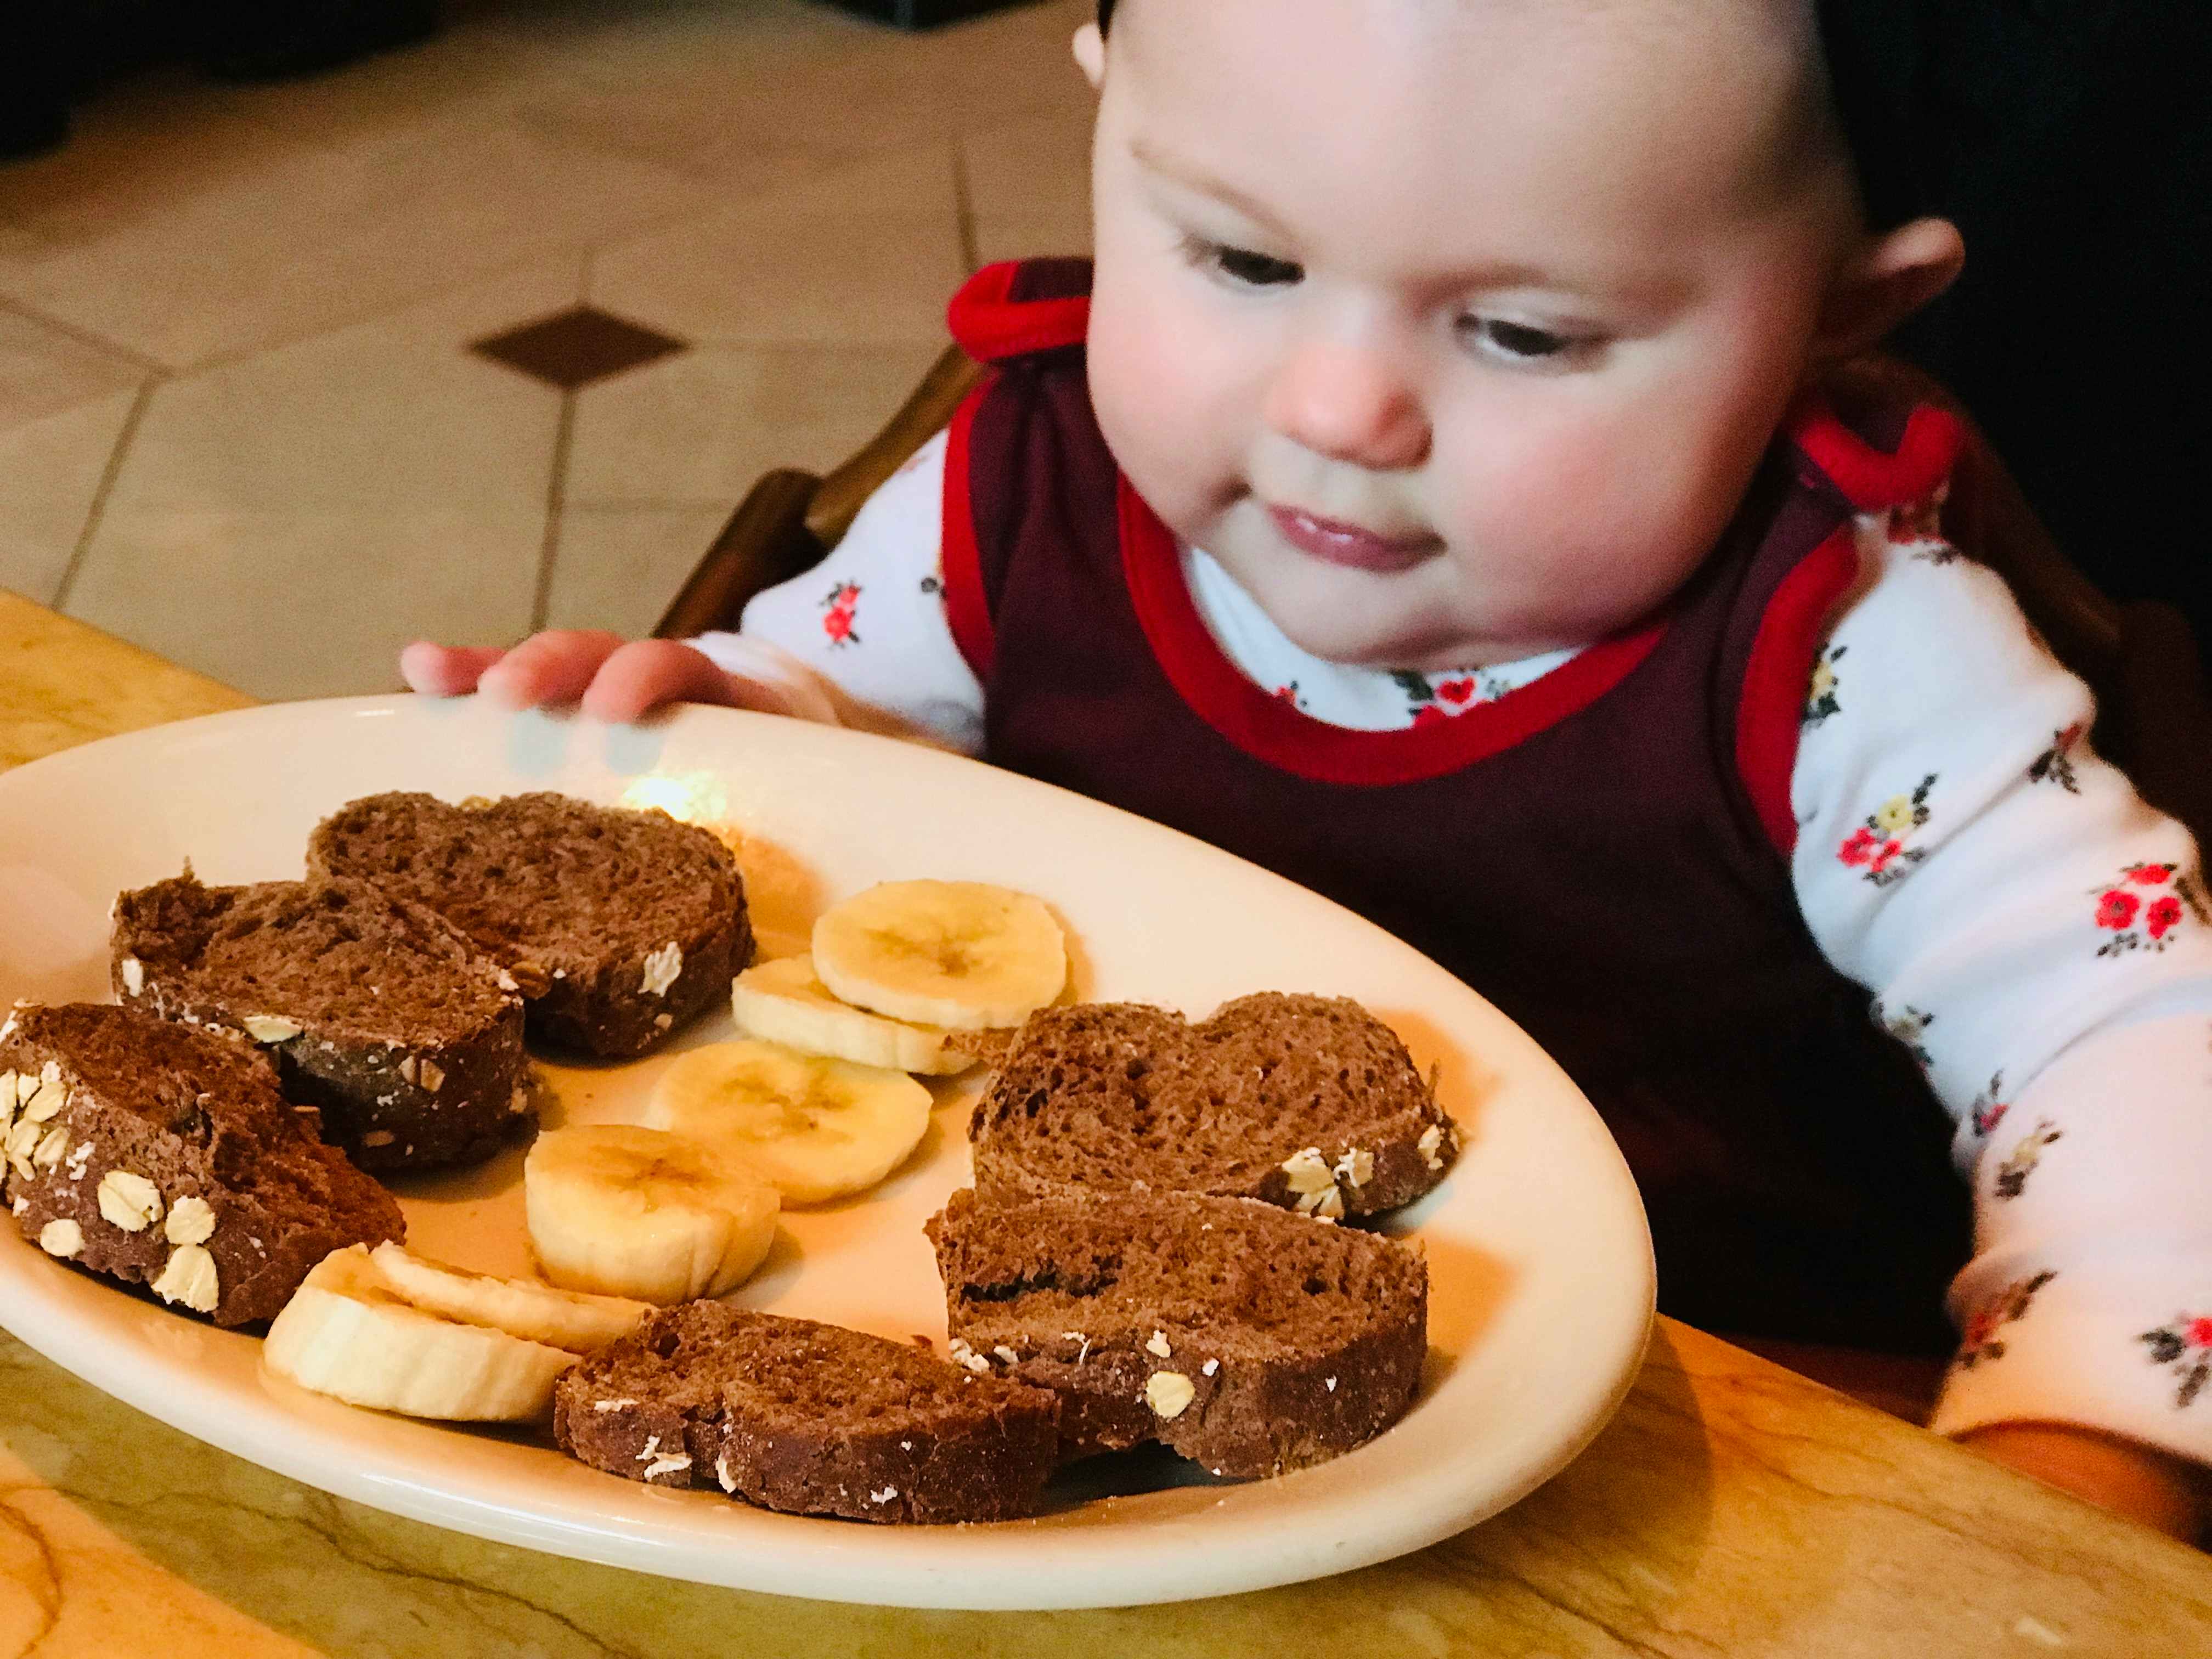 A baby sitting at a table, looking down at a plate of small slices of bread and banana slices.